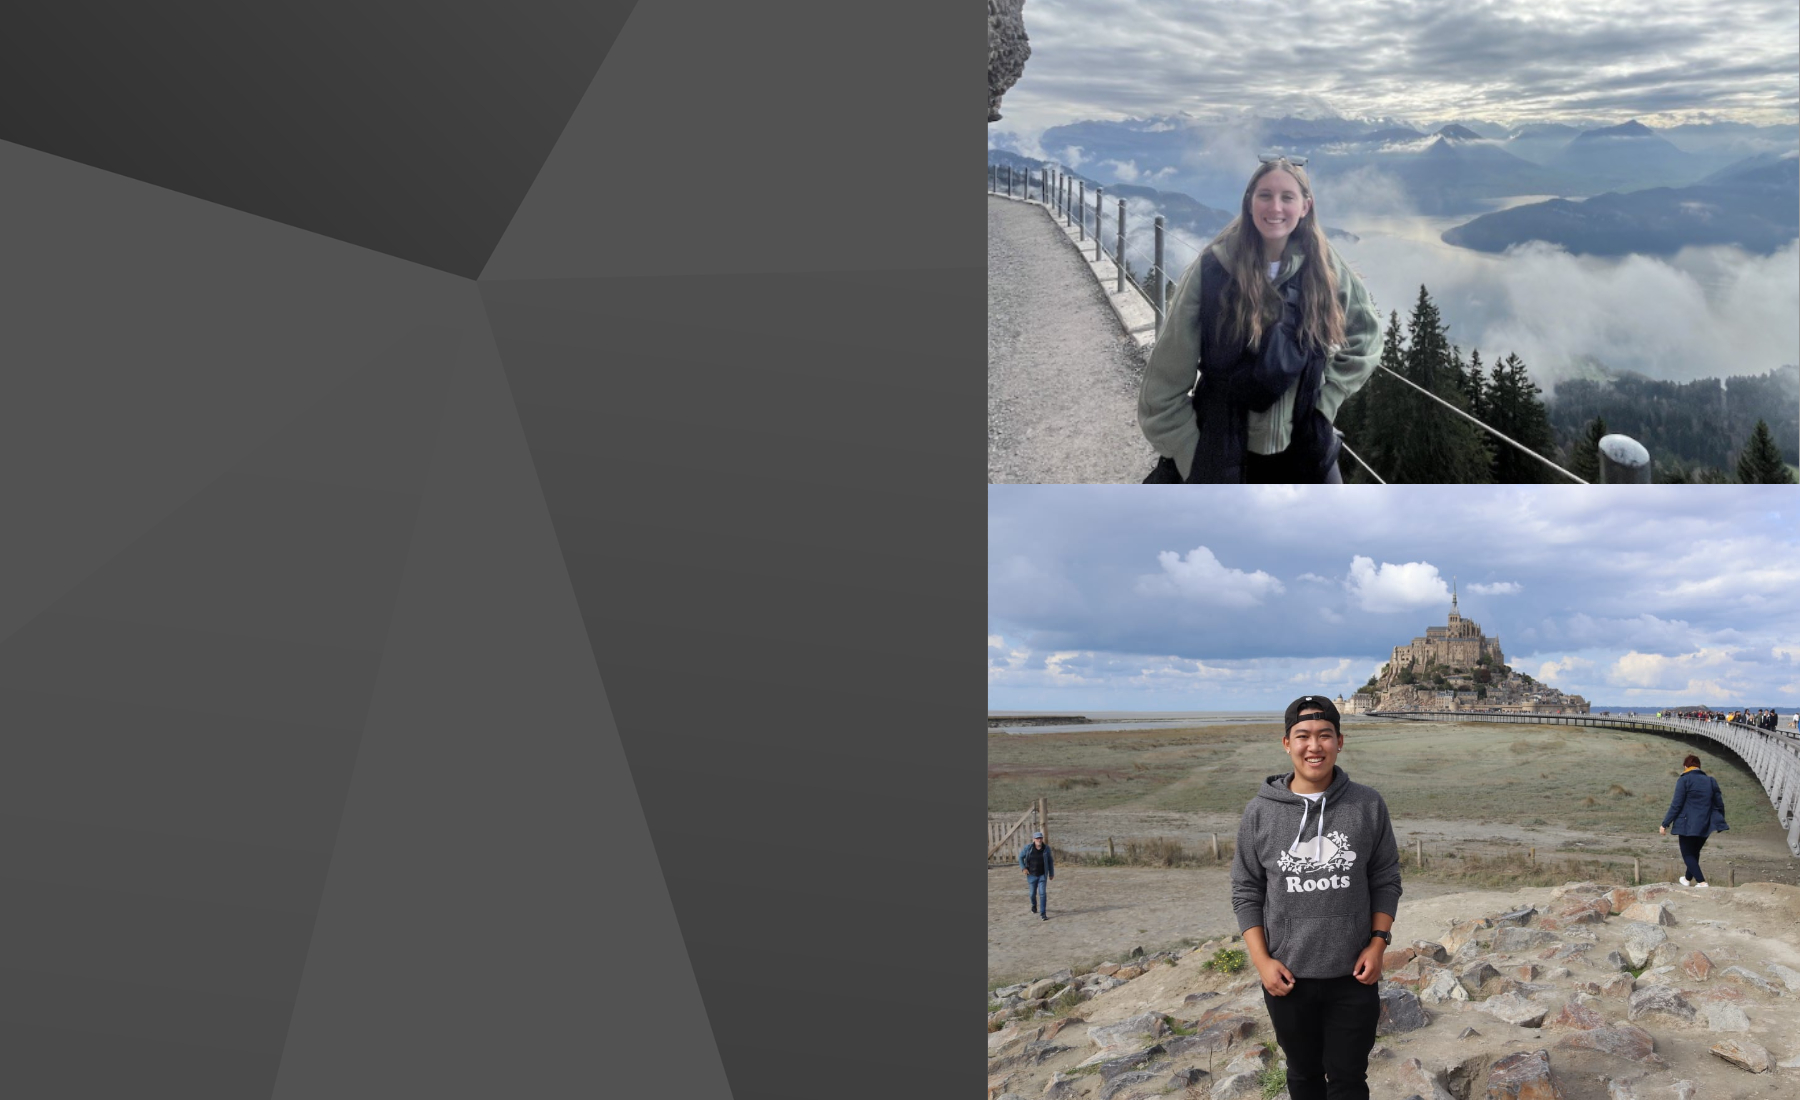 Grey geometric background with two pictures of students on exchange. One female standing in front of scenic mountainous background. One male standing in front of a castle 